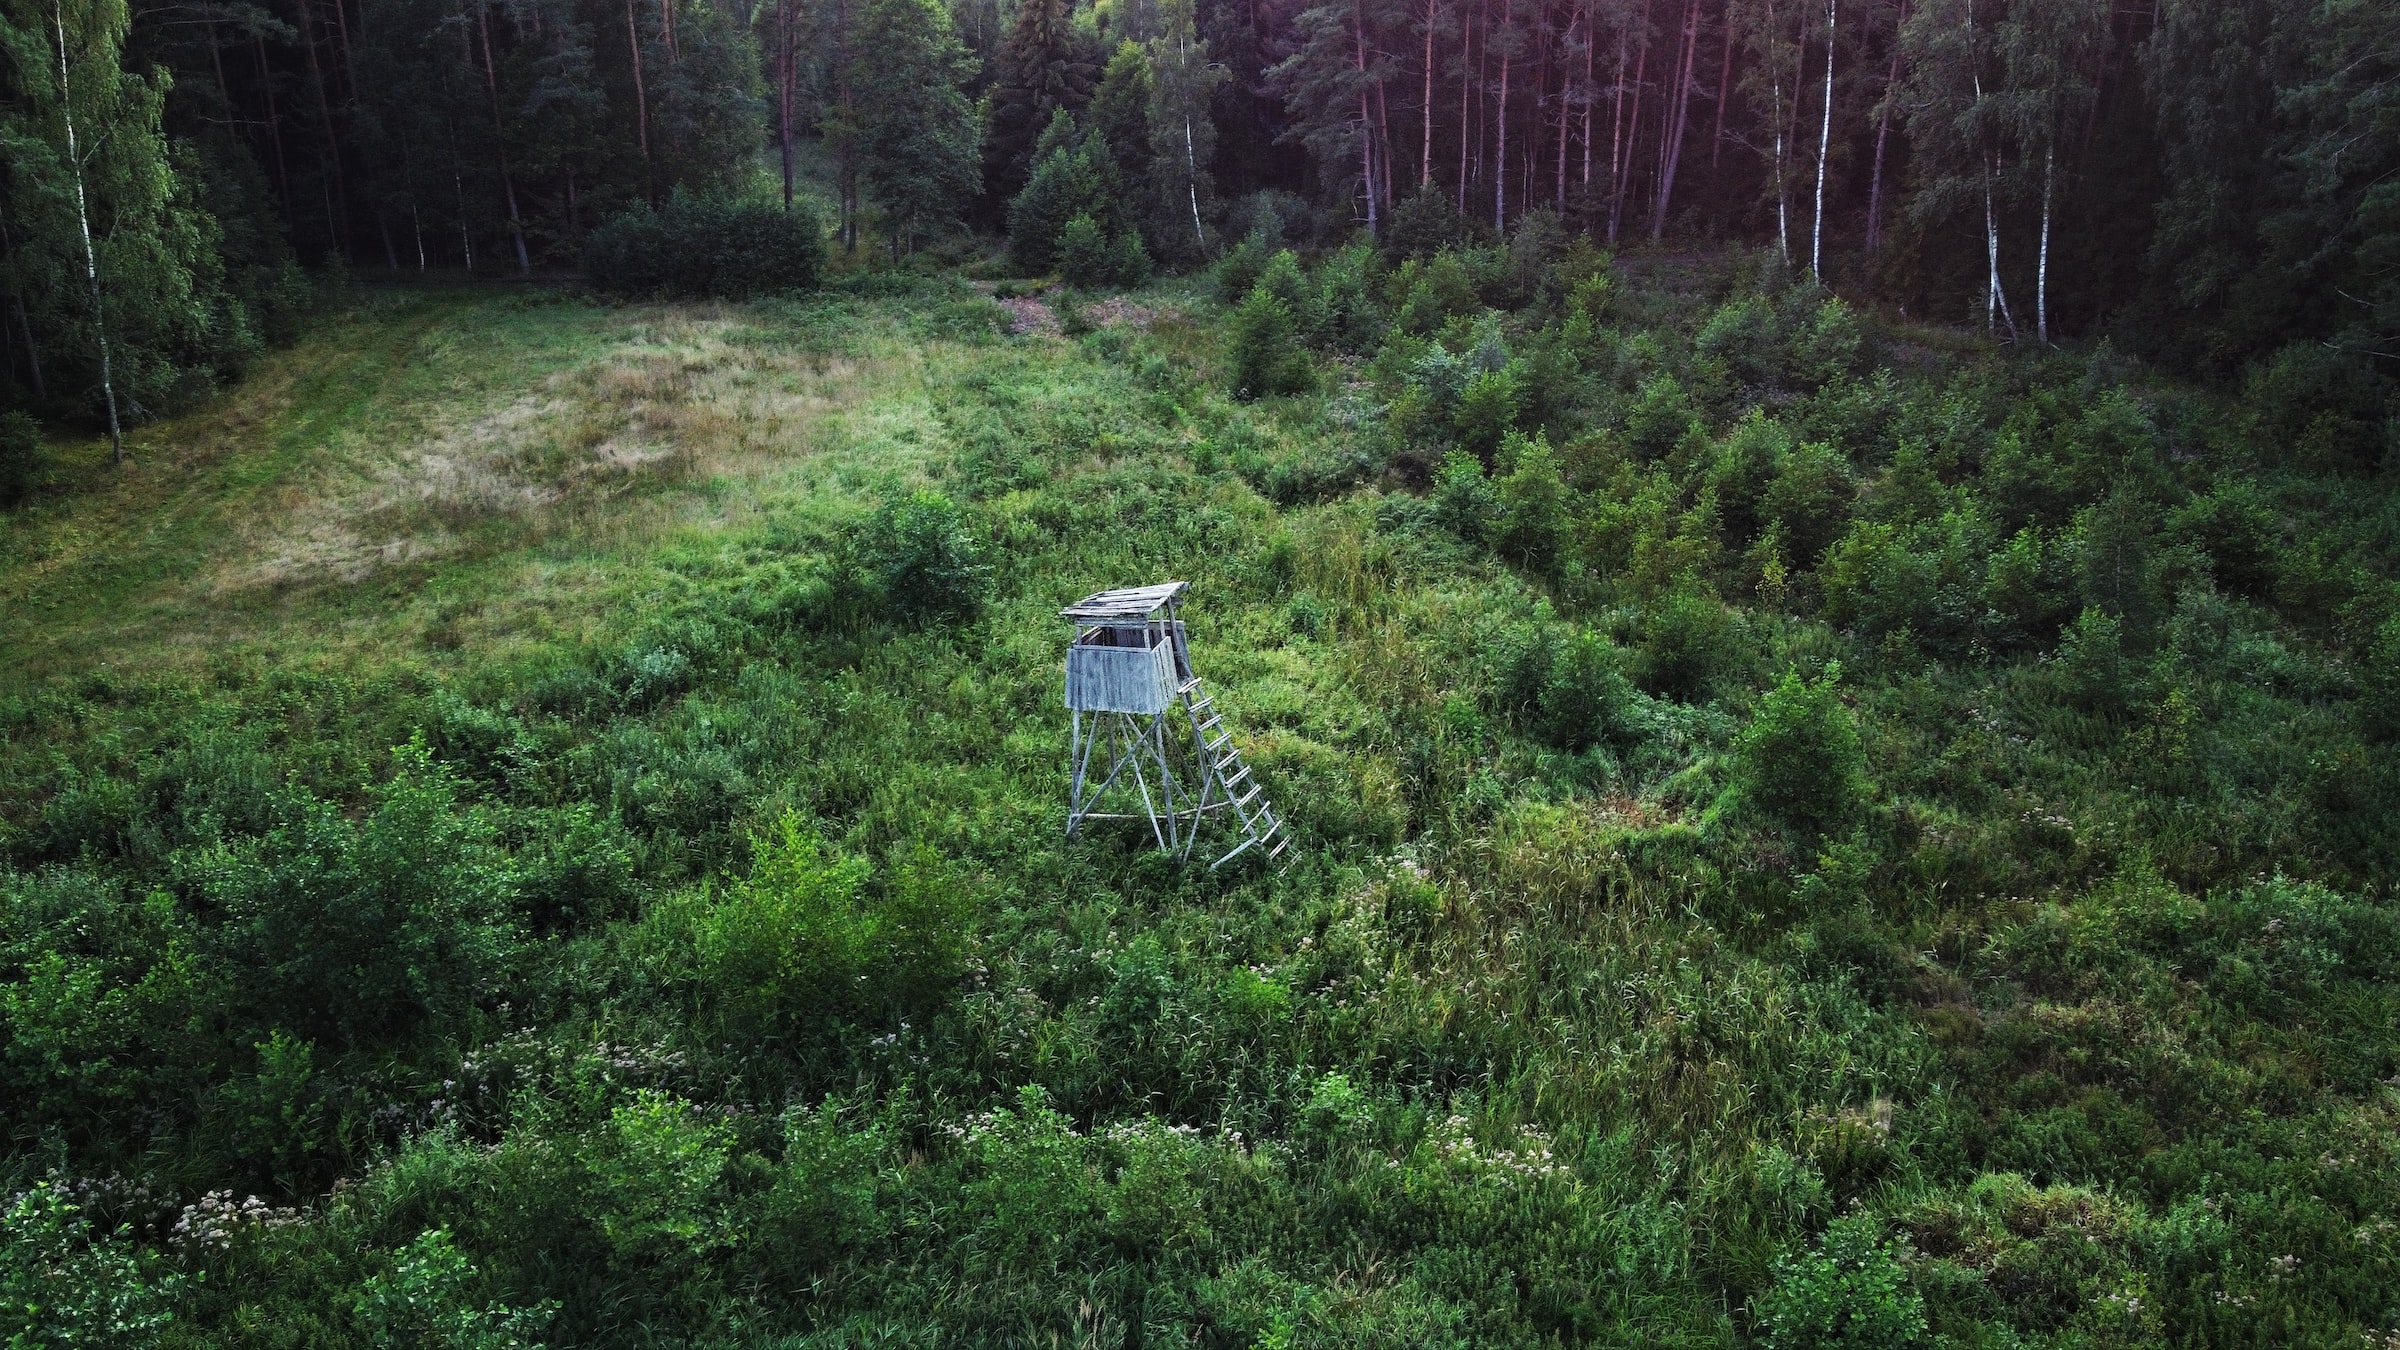 A hunting blind in a clearing in a forest